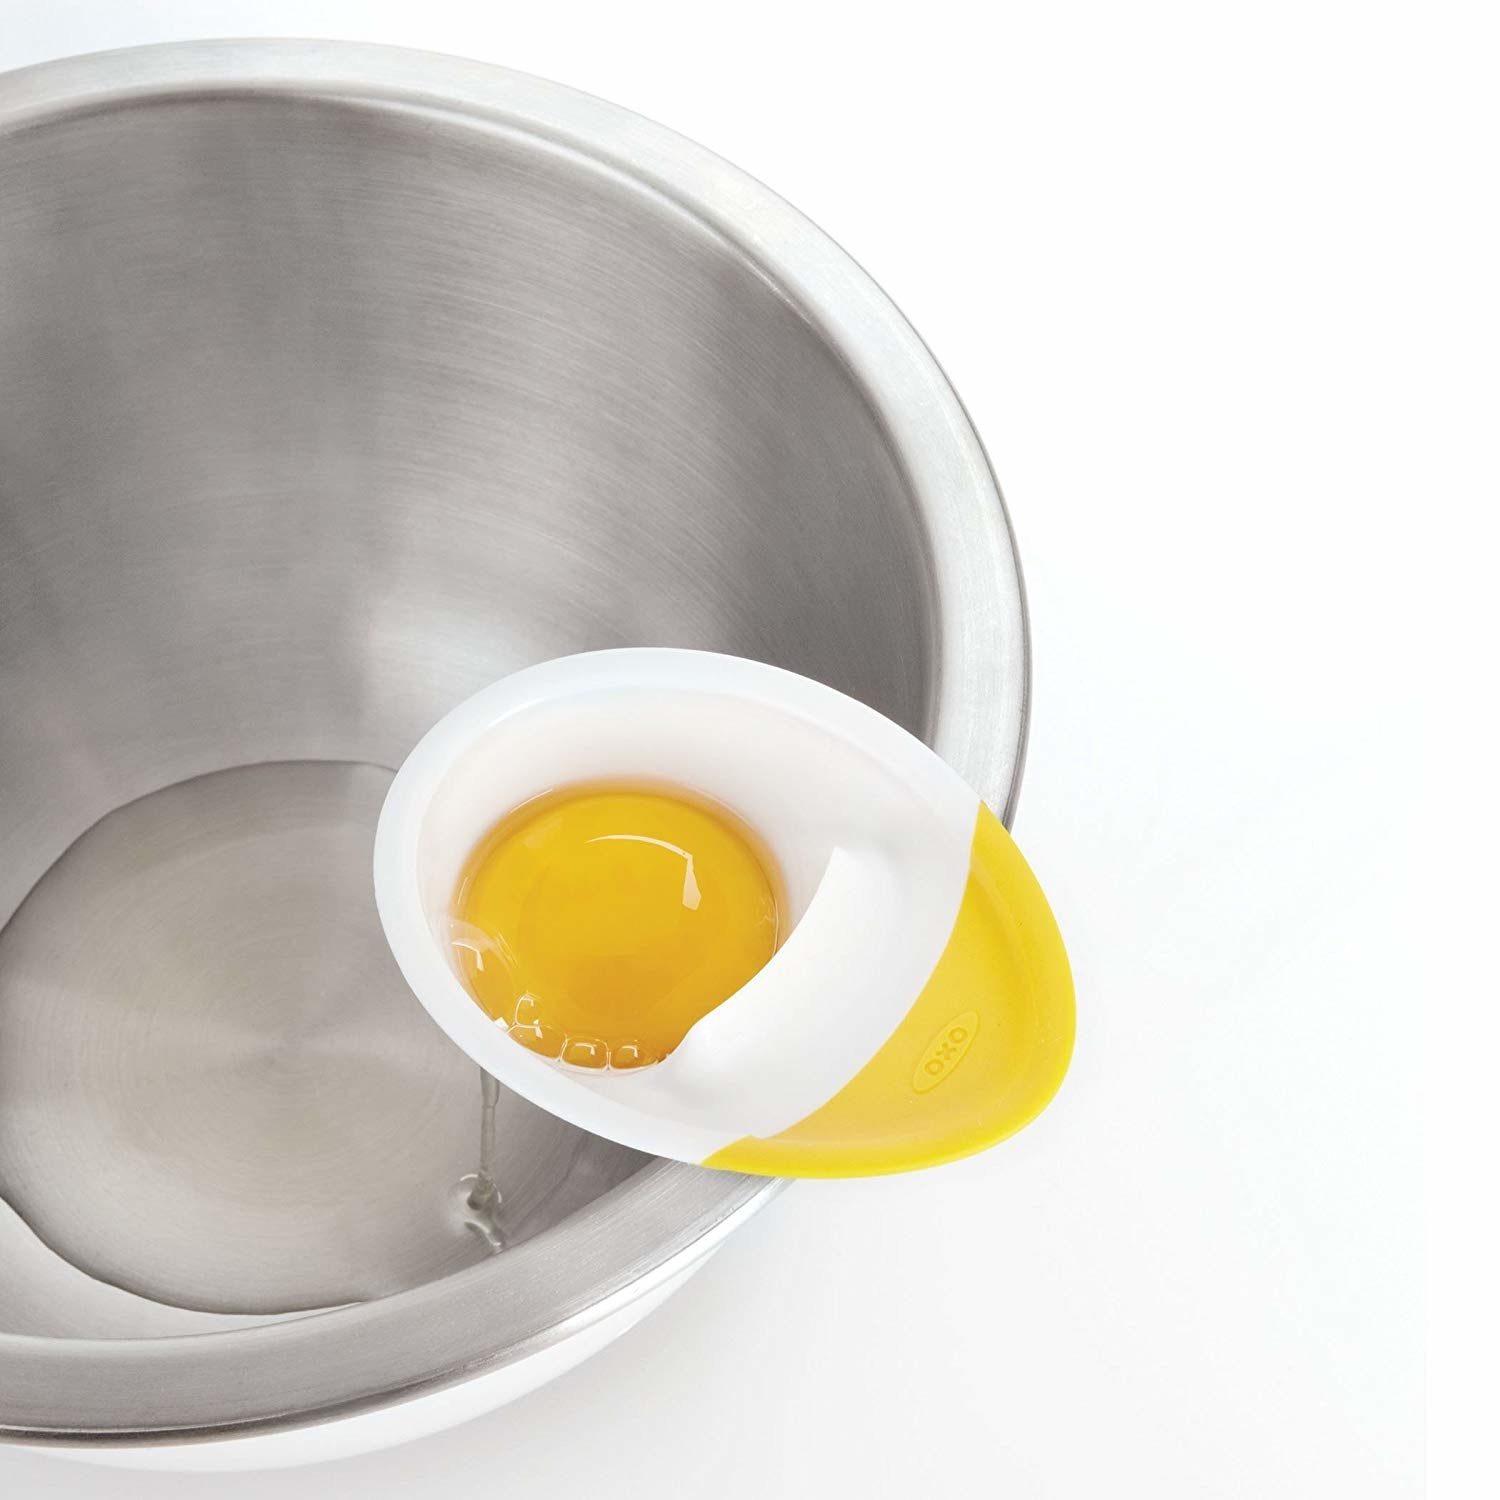 egg separator attached to side of bowl with the white dripping into the bowl